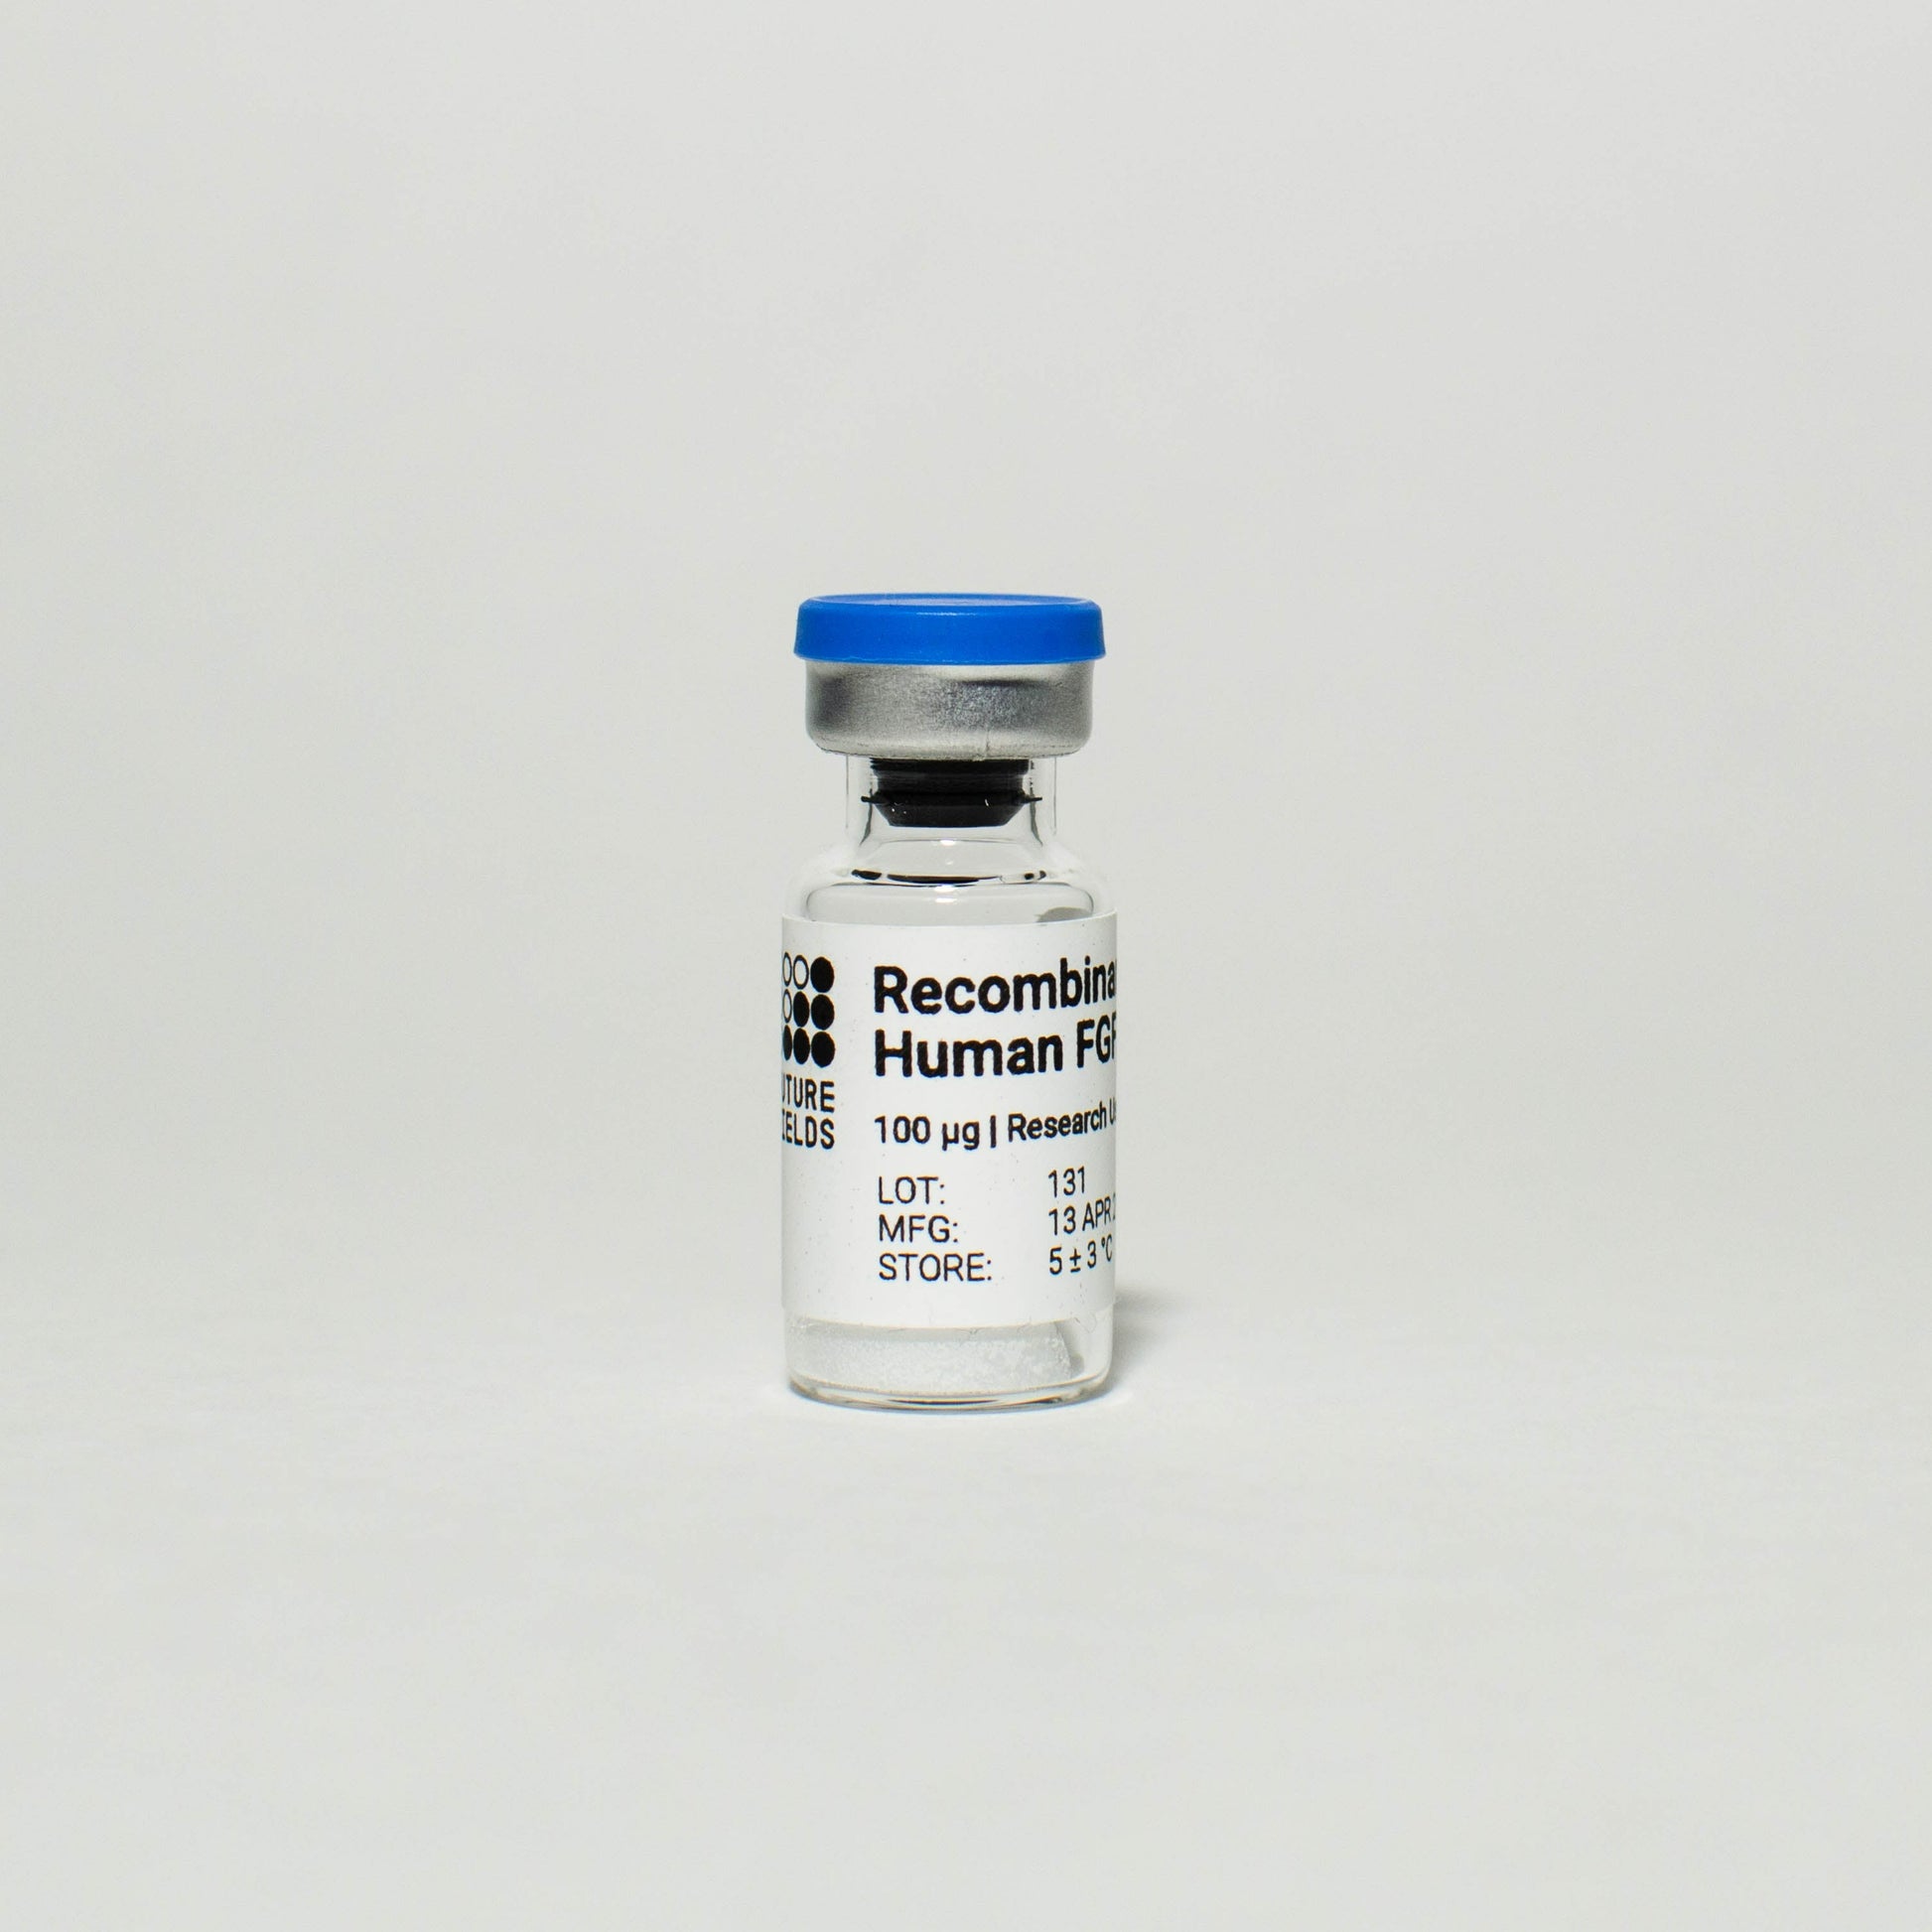 Photograph of a small vial with a white label that reads "Recombinant Human FGF2", product info, and the Future Fields logo. Future Fields Recombinant Human FGF2 is an active FGF2 growth factor produced with the EntoEngine™ platform.